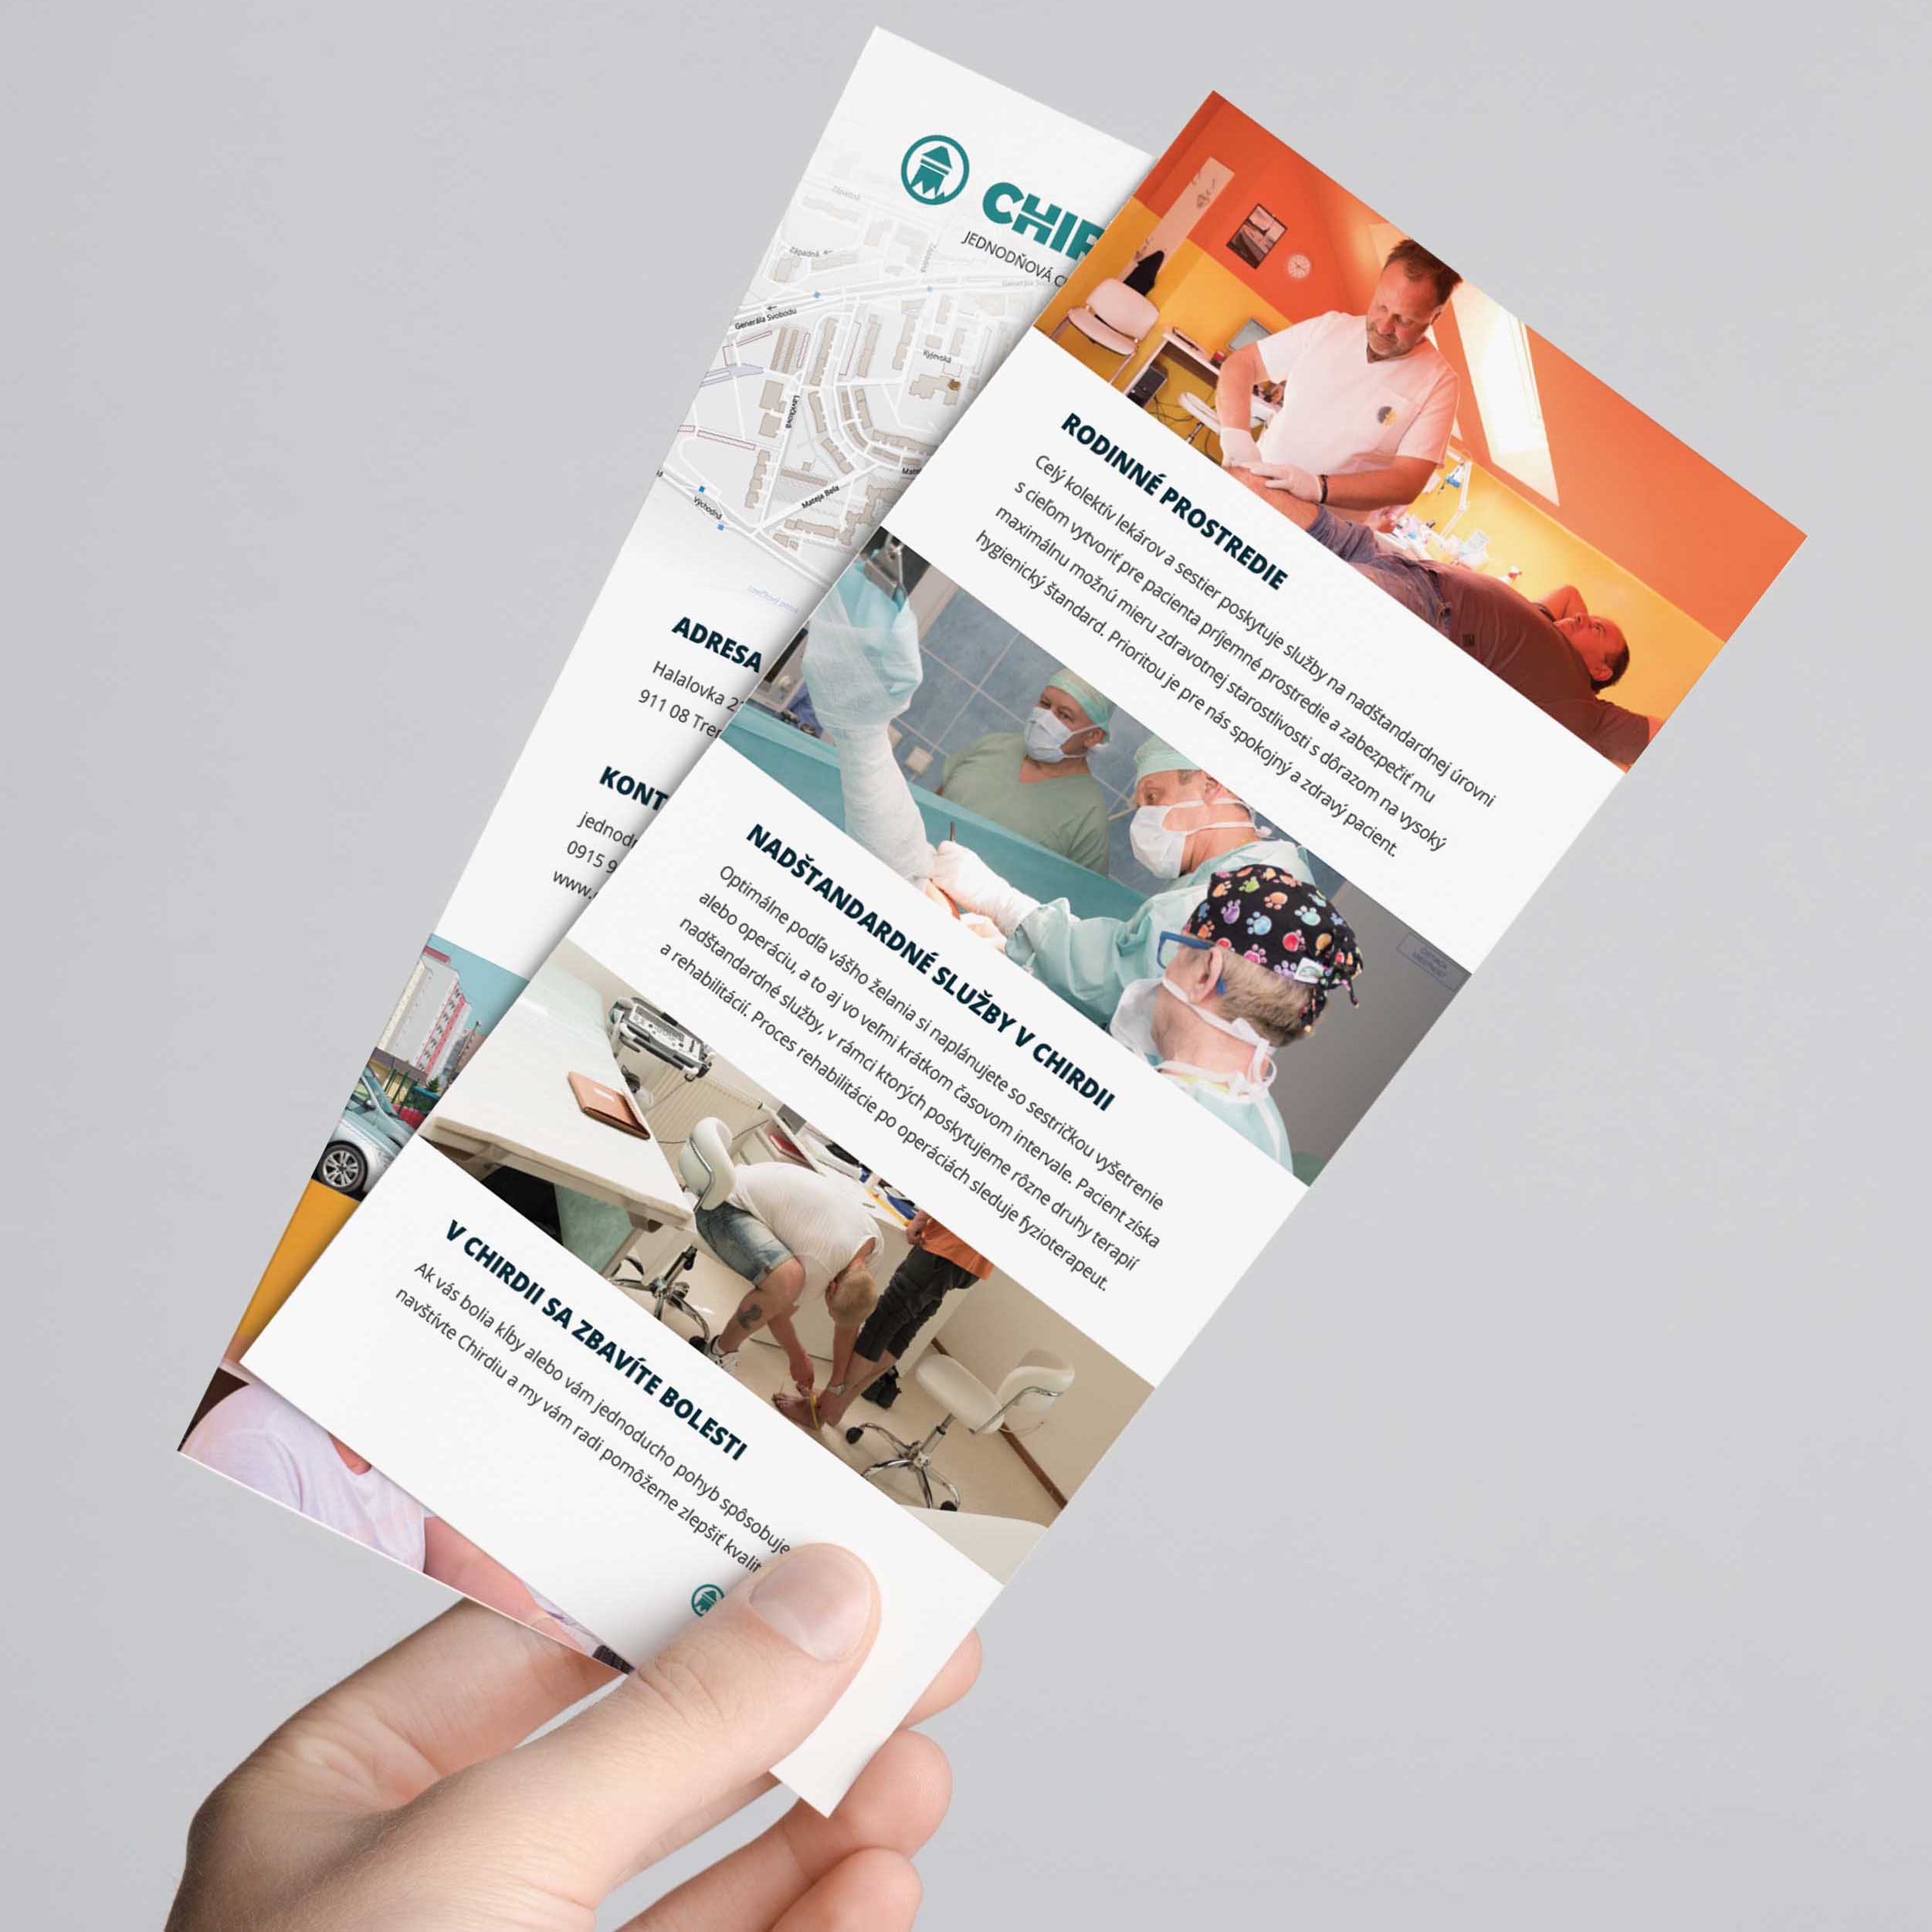 A leaflet outlining a one-day clinic